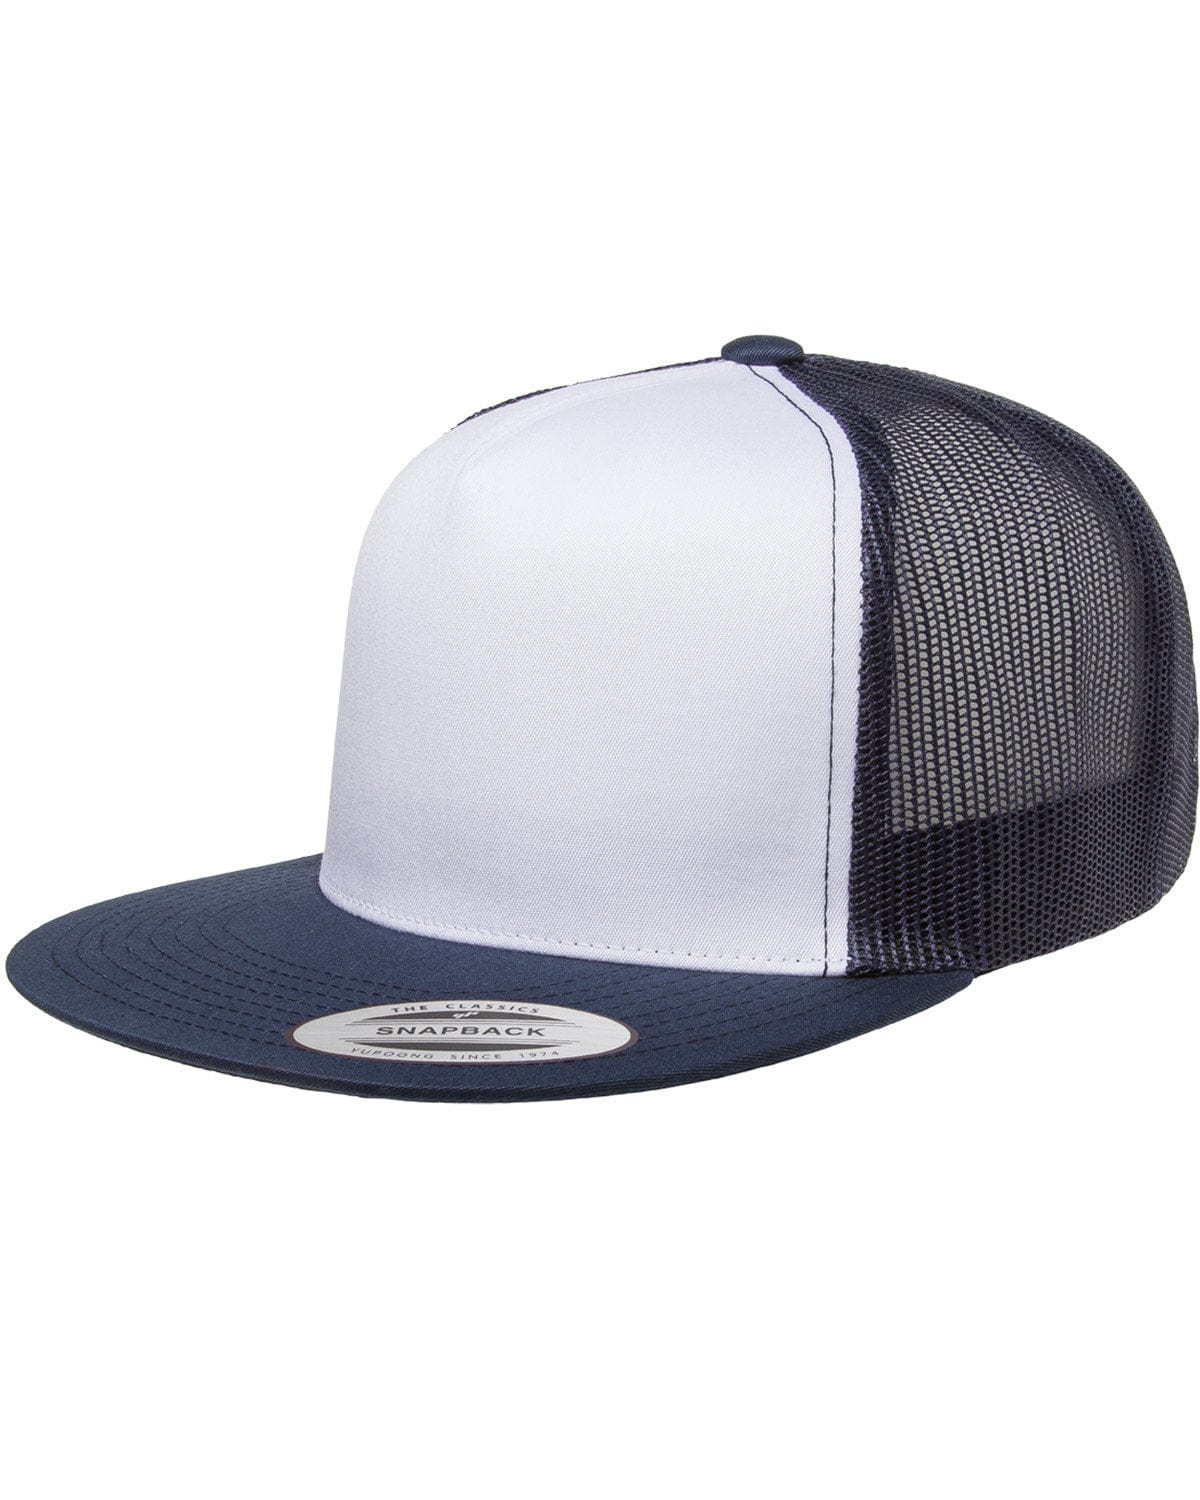 Yupoong 6006W: Adult Classic Trucker with White Front Panel Cap